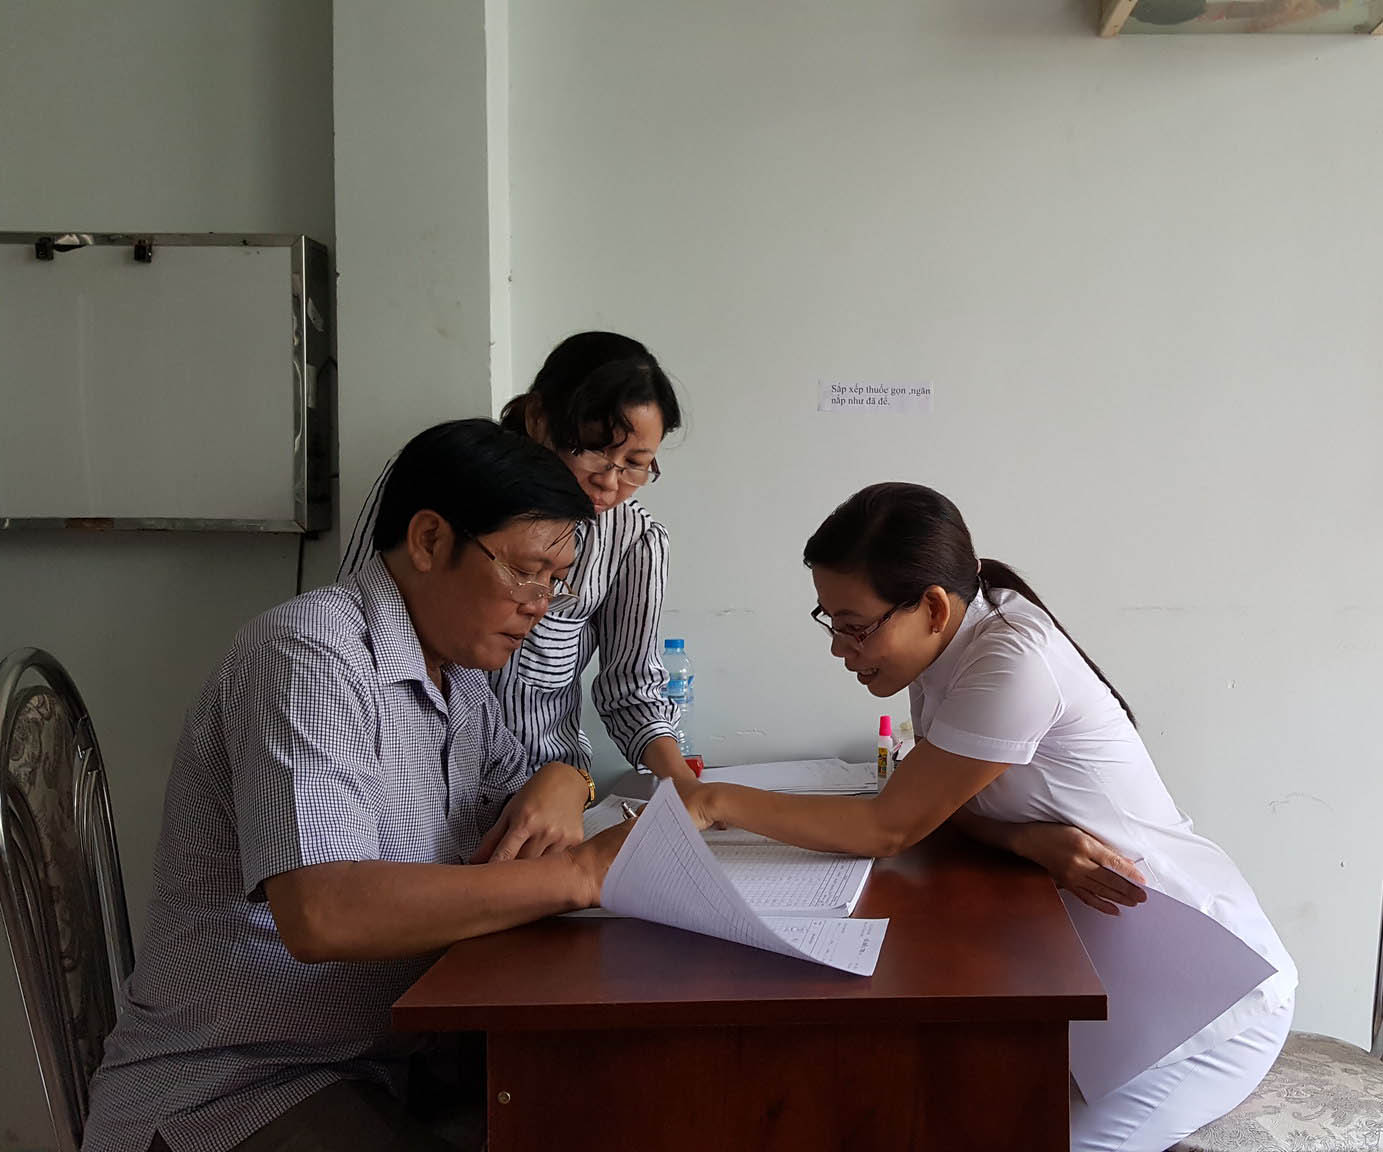 Three health workers in Vietnam huddle over a small table looking through paperwork.